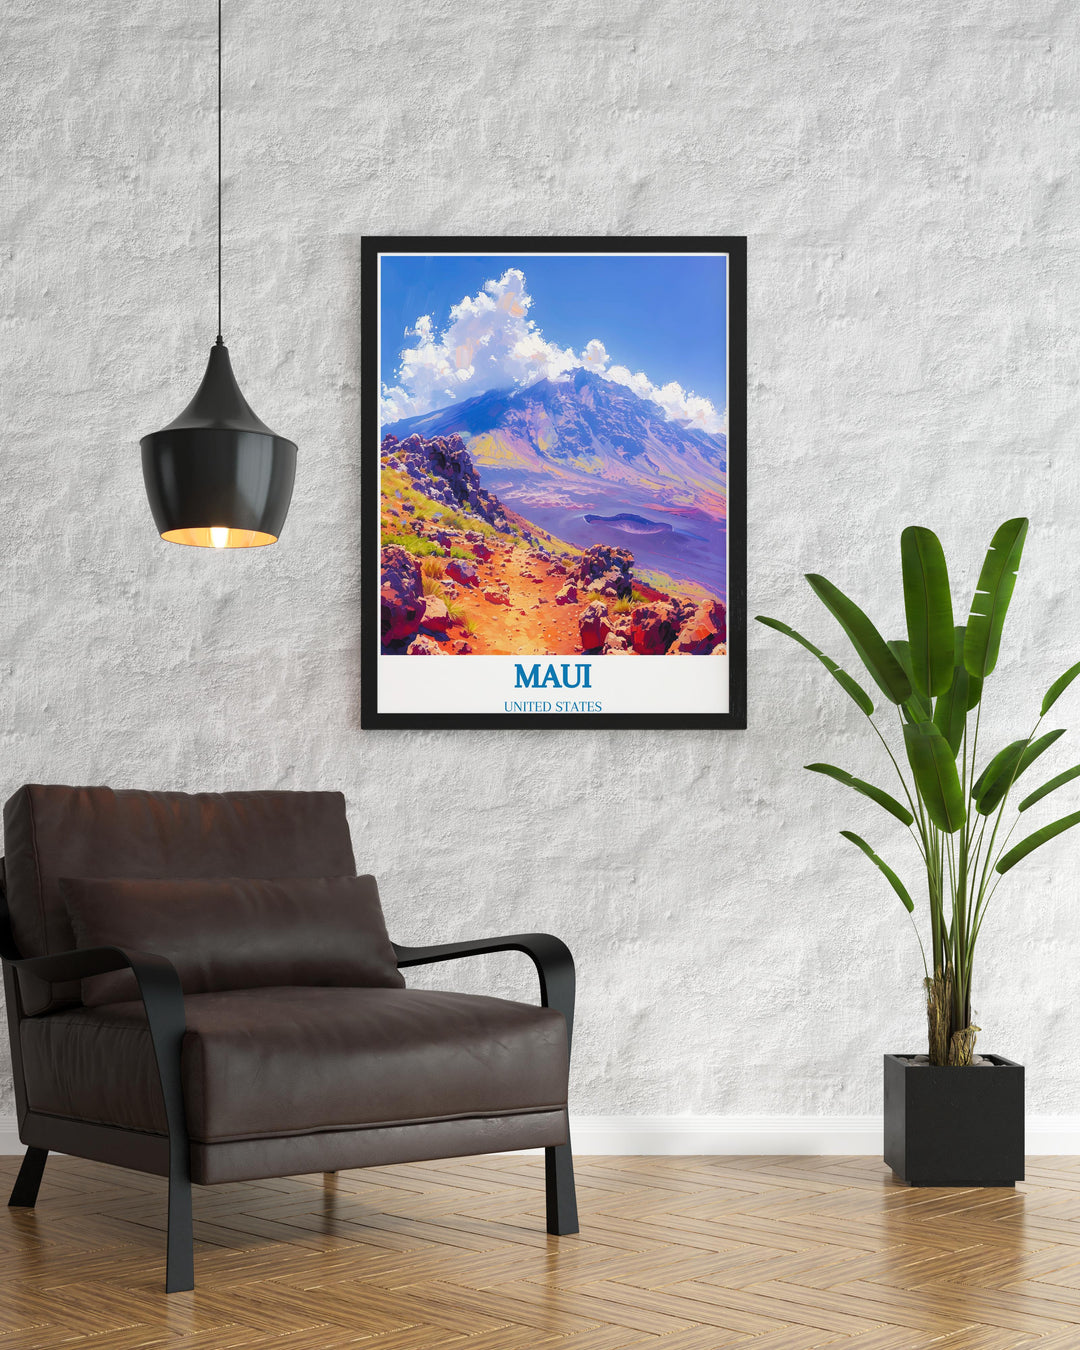 Maui wall art print depicting the dynamic volcanic landscapes of Haleakalā, blending natural beauty with artistic flair.